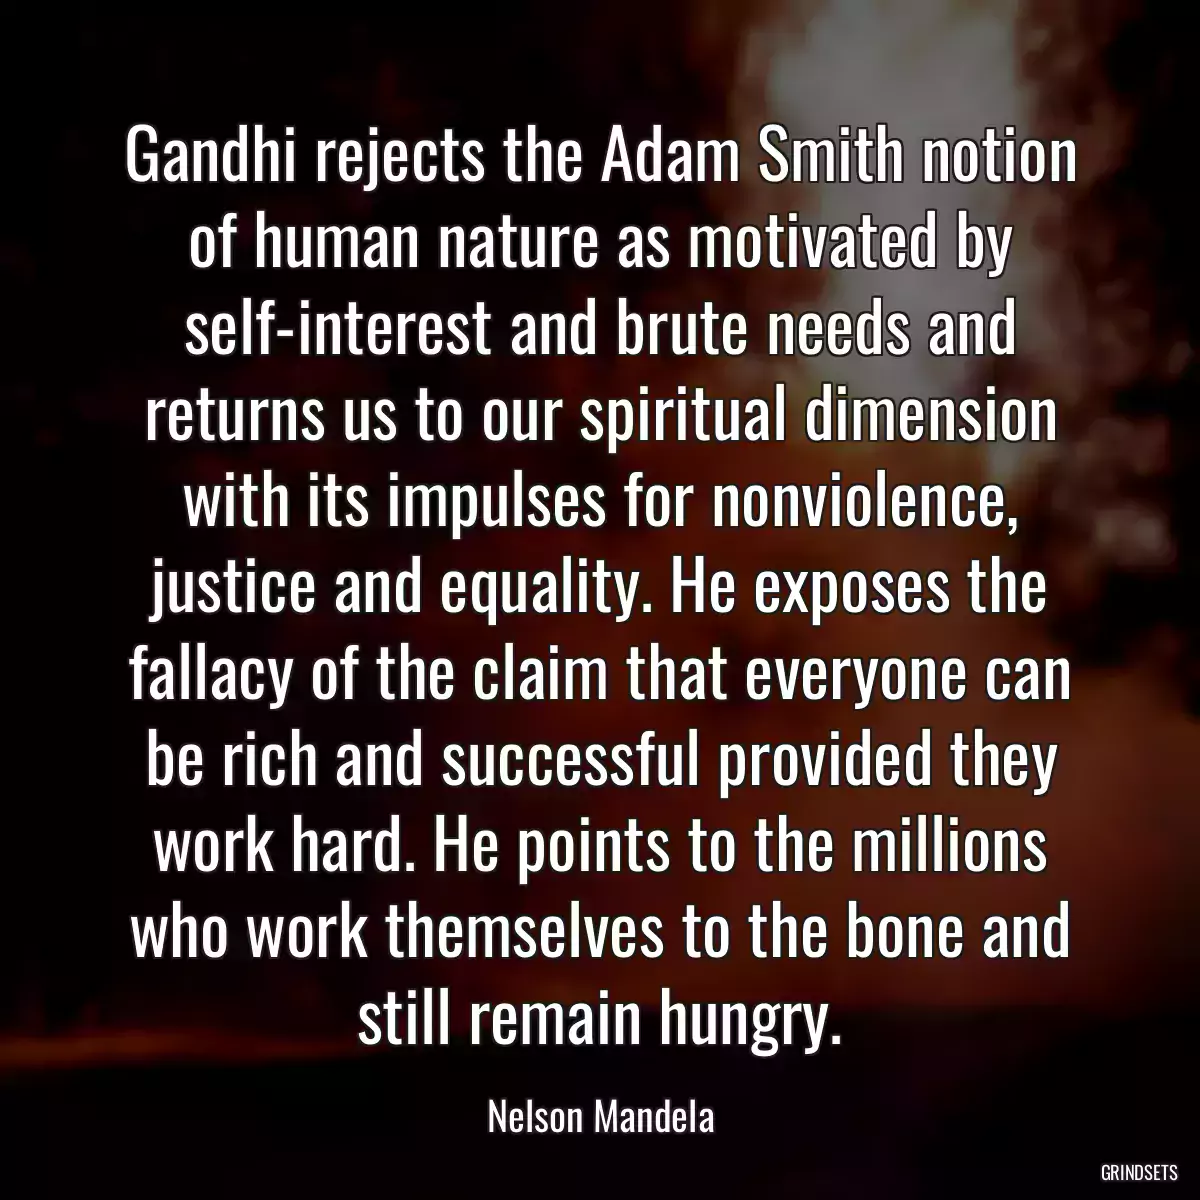 Gandhi rejects the Adam Smith notion of human nature as motivated by self-interest and brute needs and returns us to our spiritual dimension with its impulses for nonviolence, justice and equality. He exposes the fallacy of the claim that everyone can be rich and successful provided they work hard. He points to the millions who work themselves to the bone and still remain hungry.